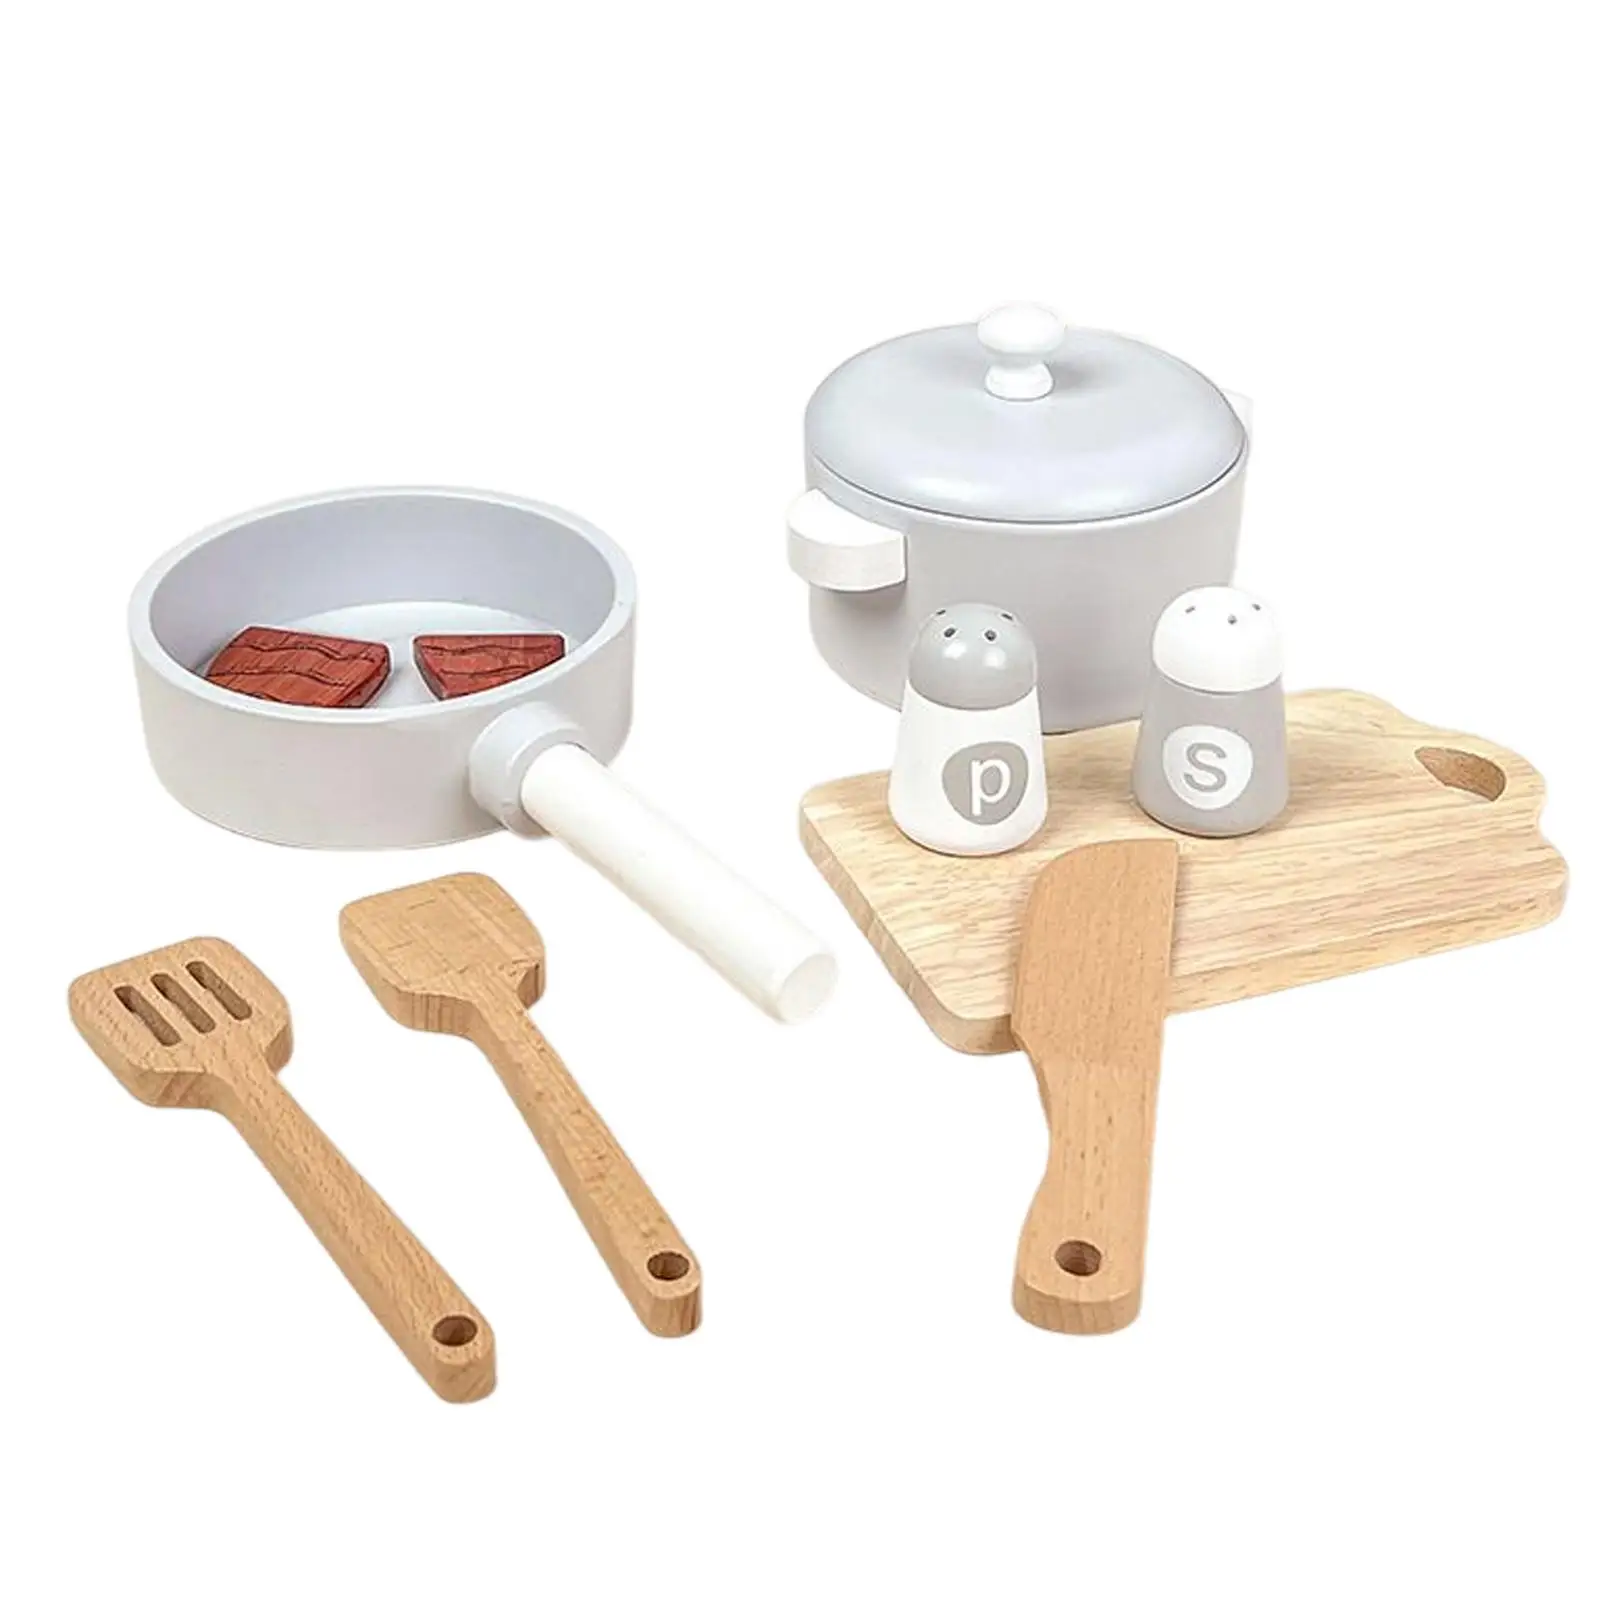 Kitchen Toyset Mini Wooden Toy Educational Play Pretend Play Interest Development Accessories Cookware Set for Cooking Adults